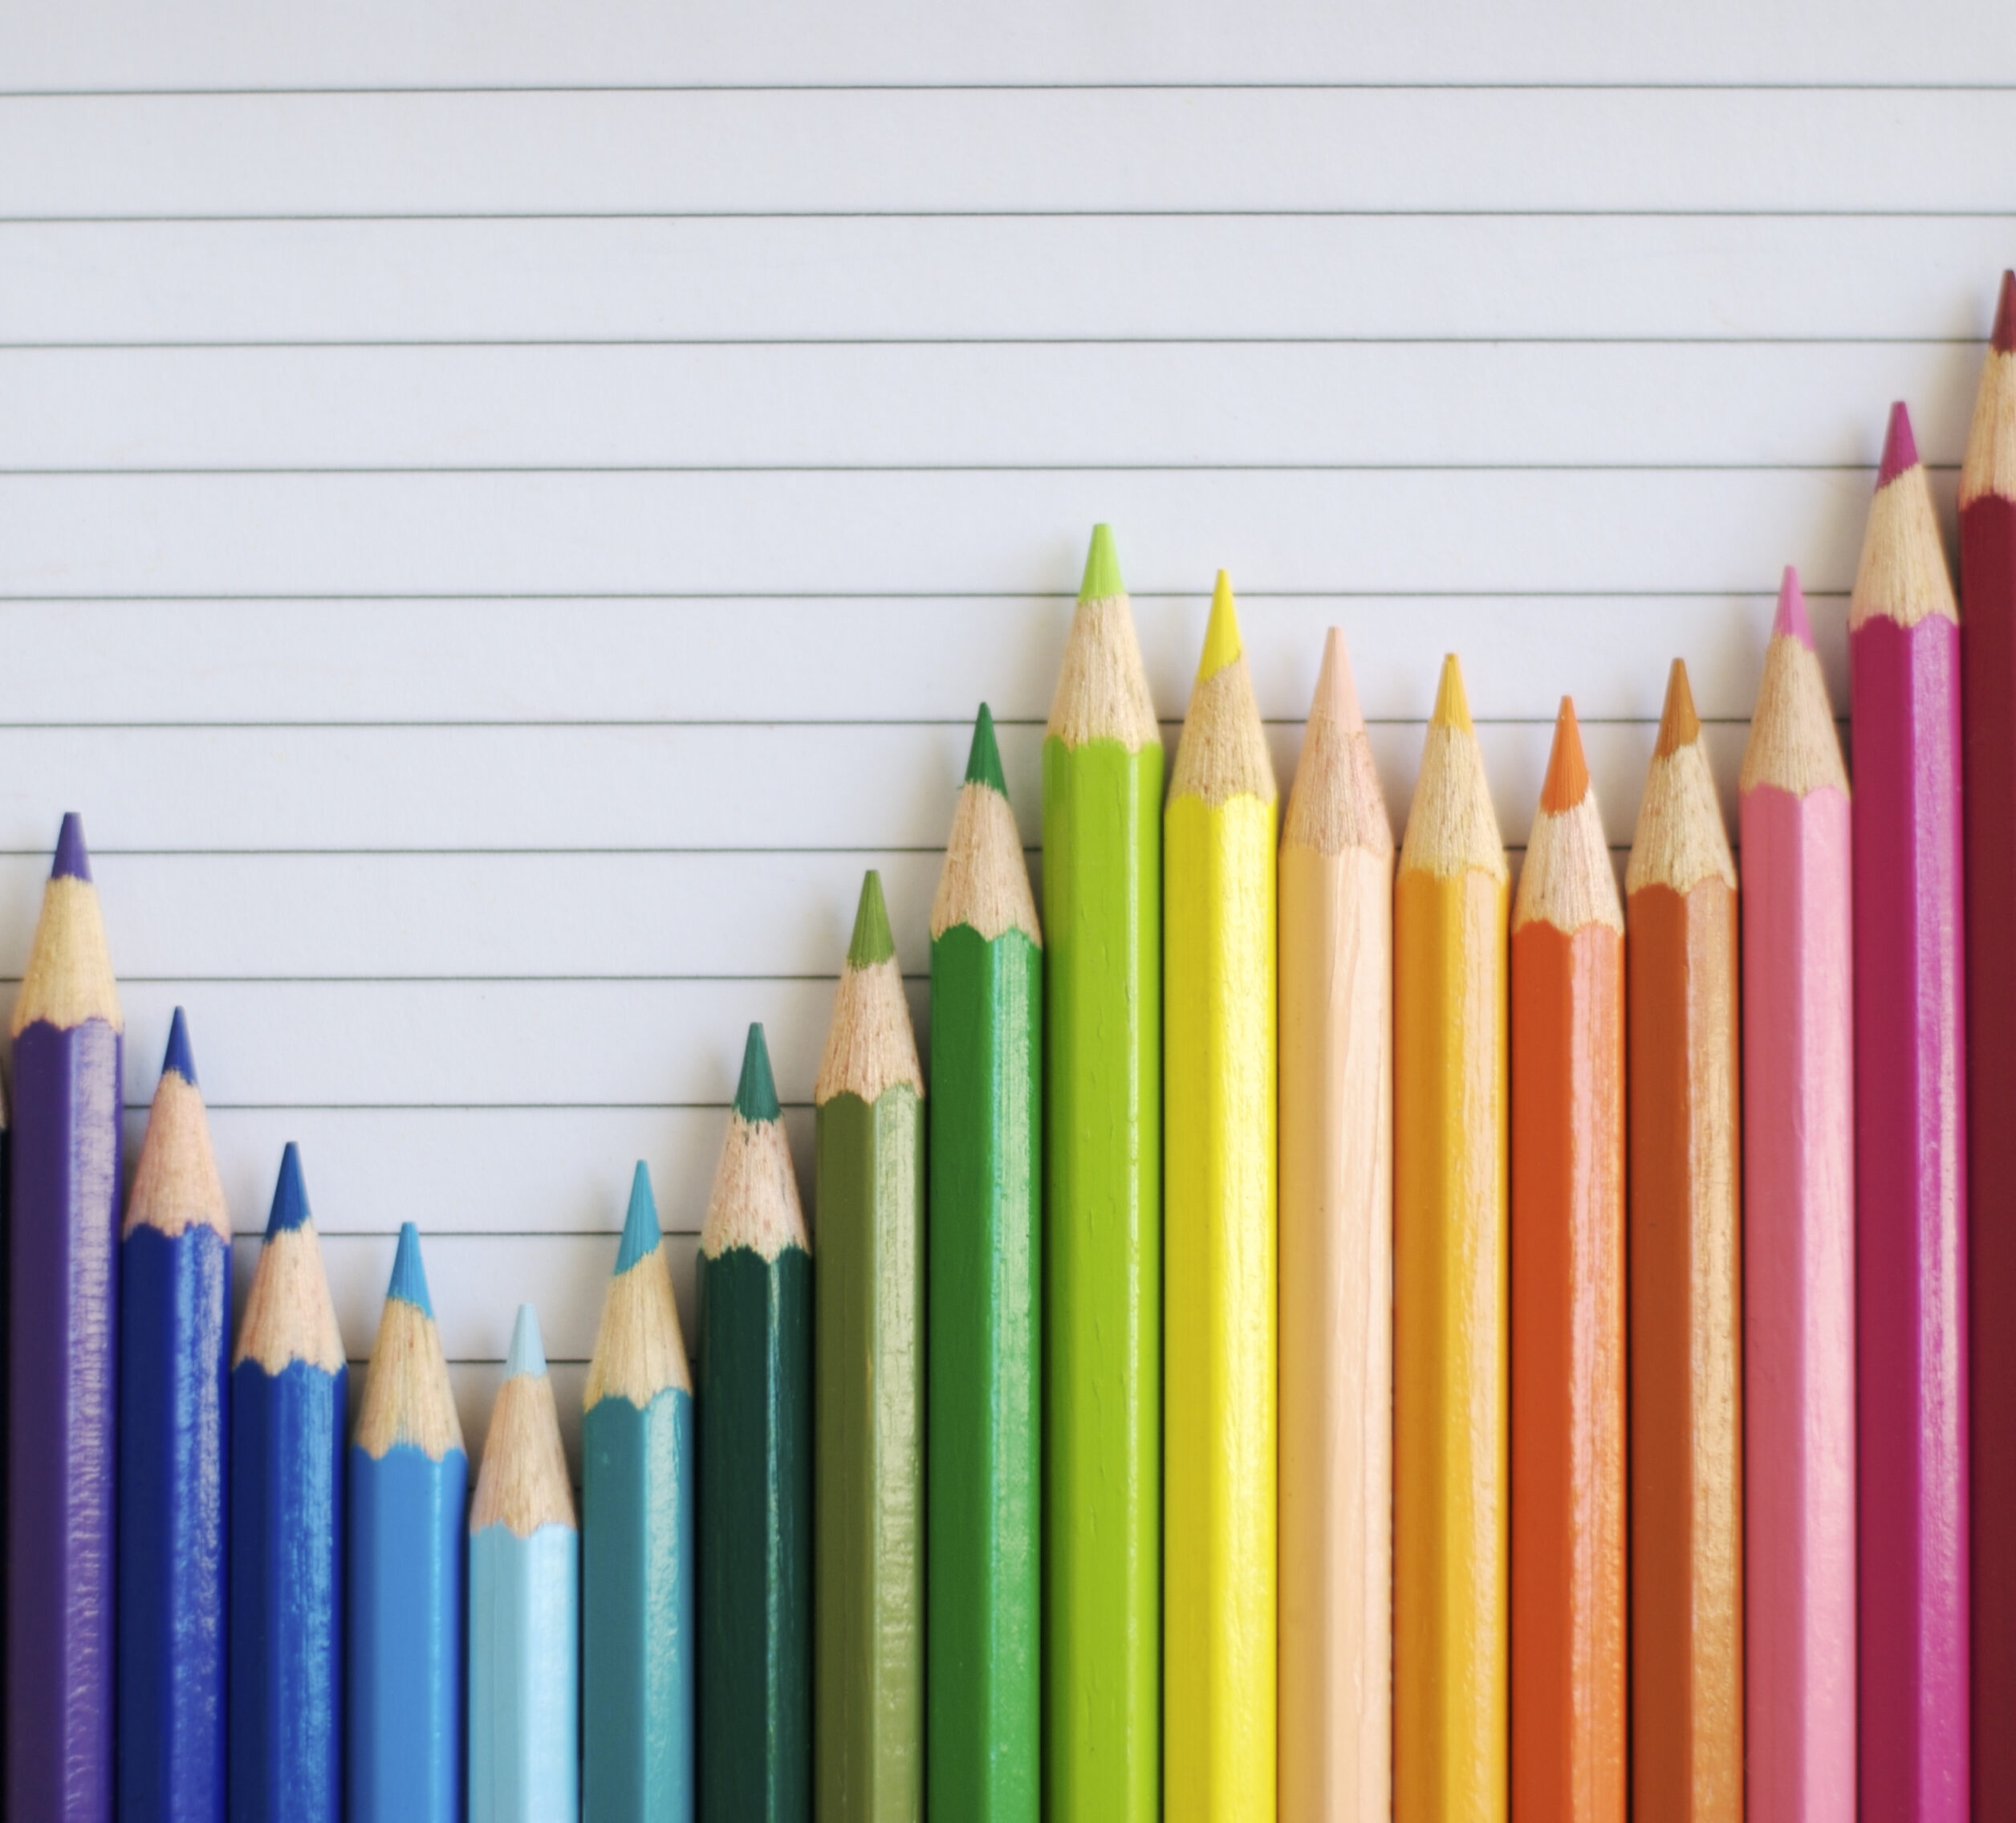 Colored pencils lined up to make a graph trending upwards